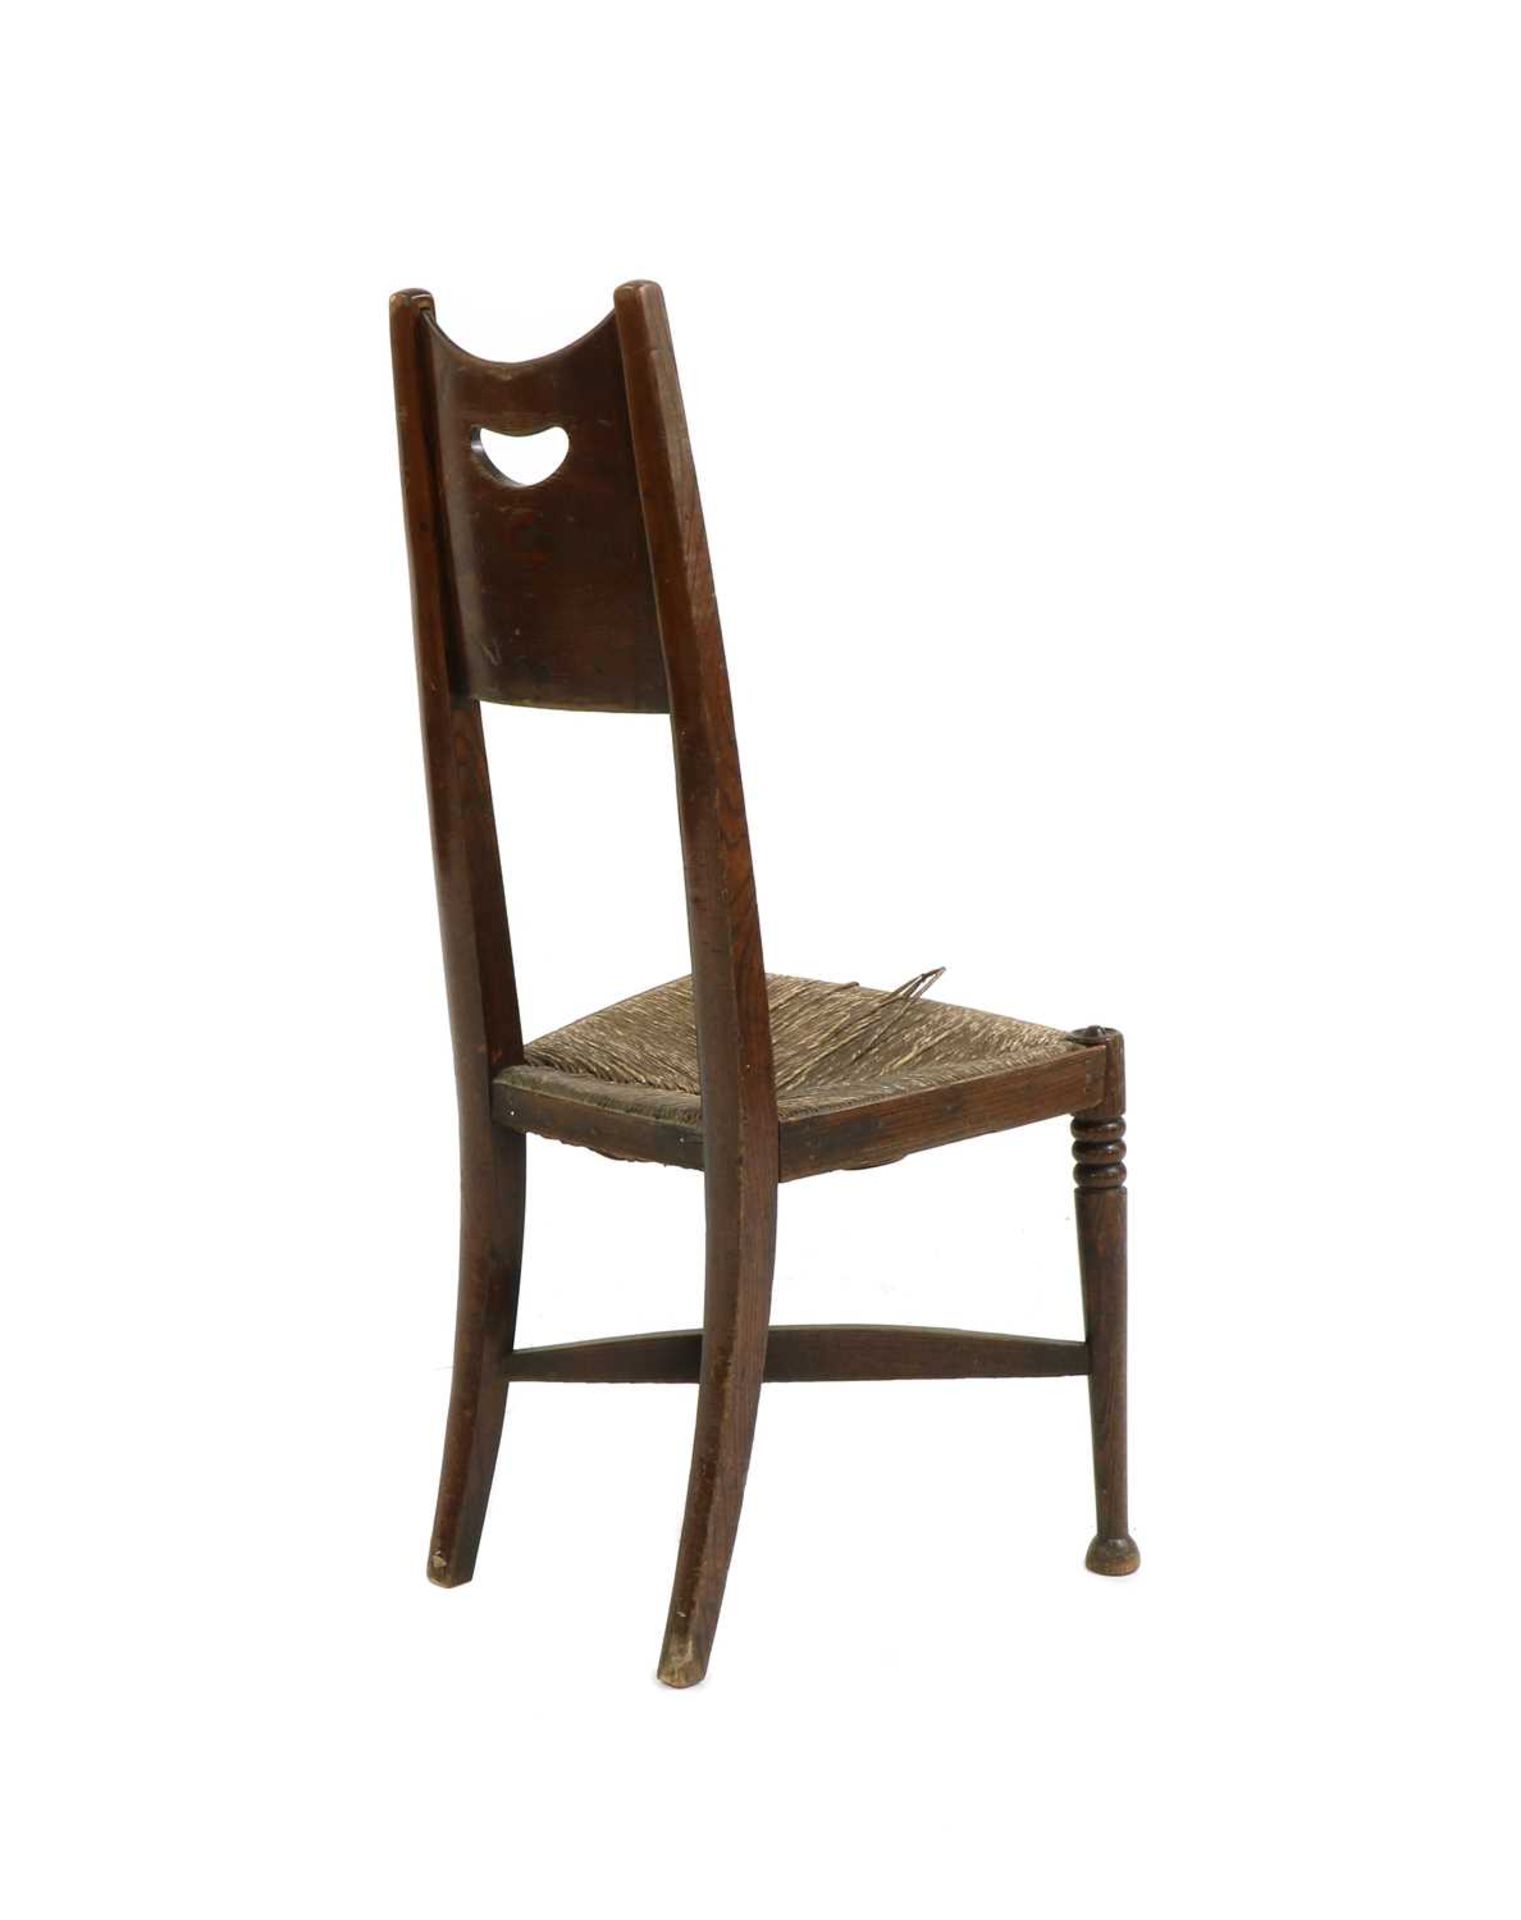 A William Birch ash side chair, - Image 4 of 4